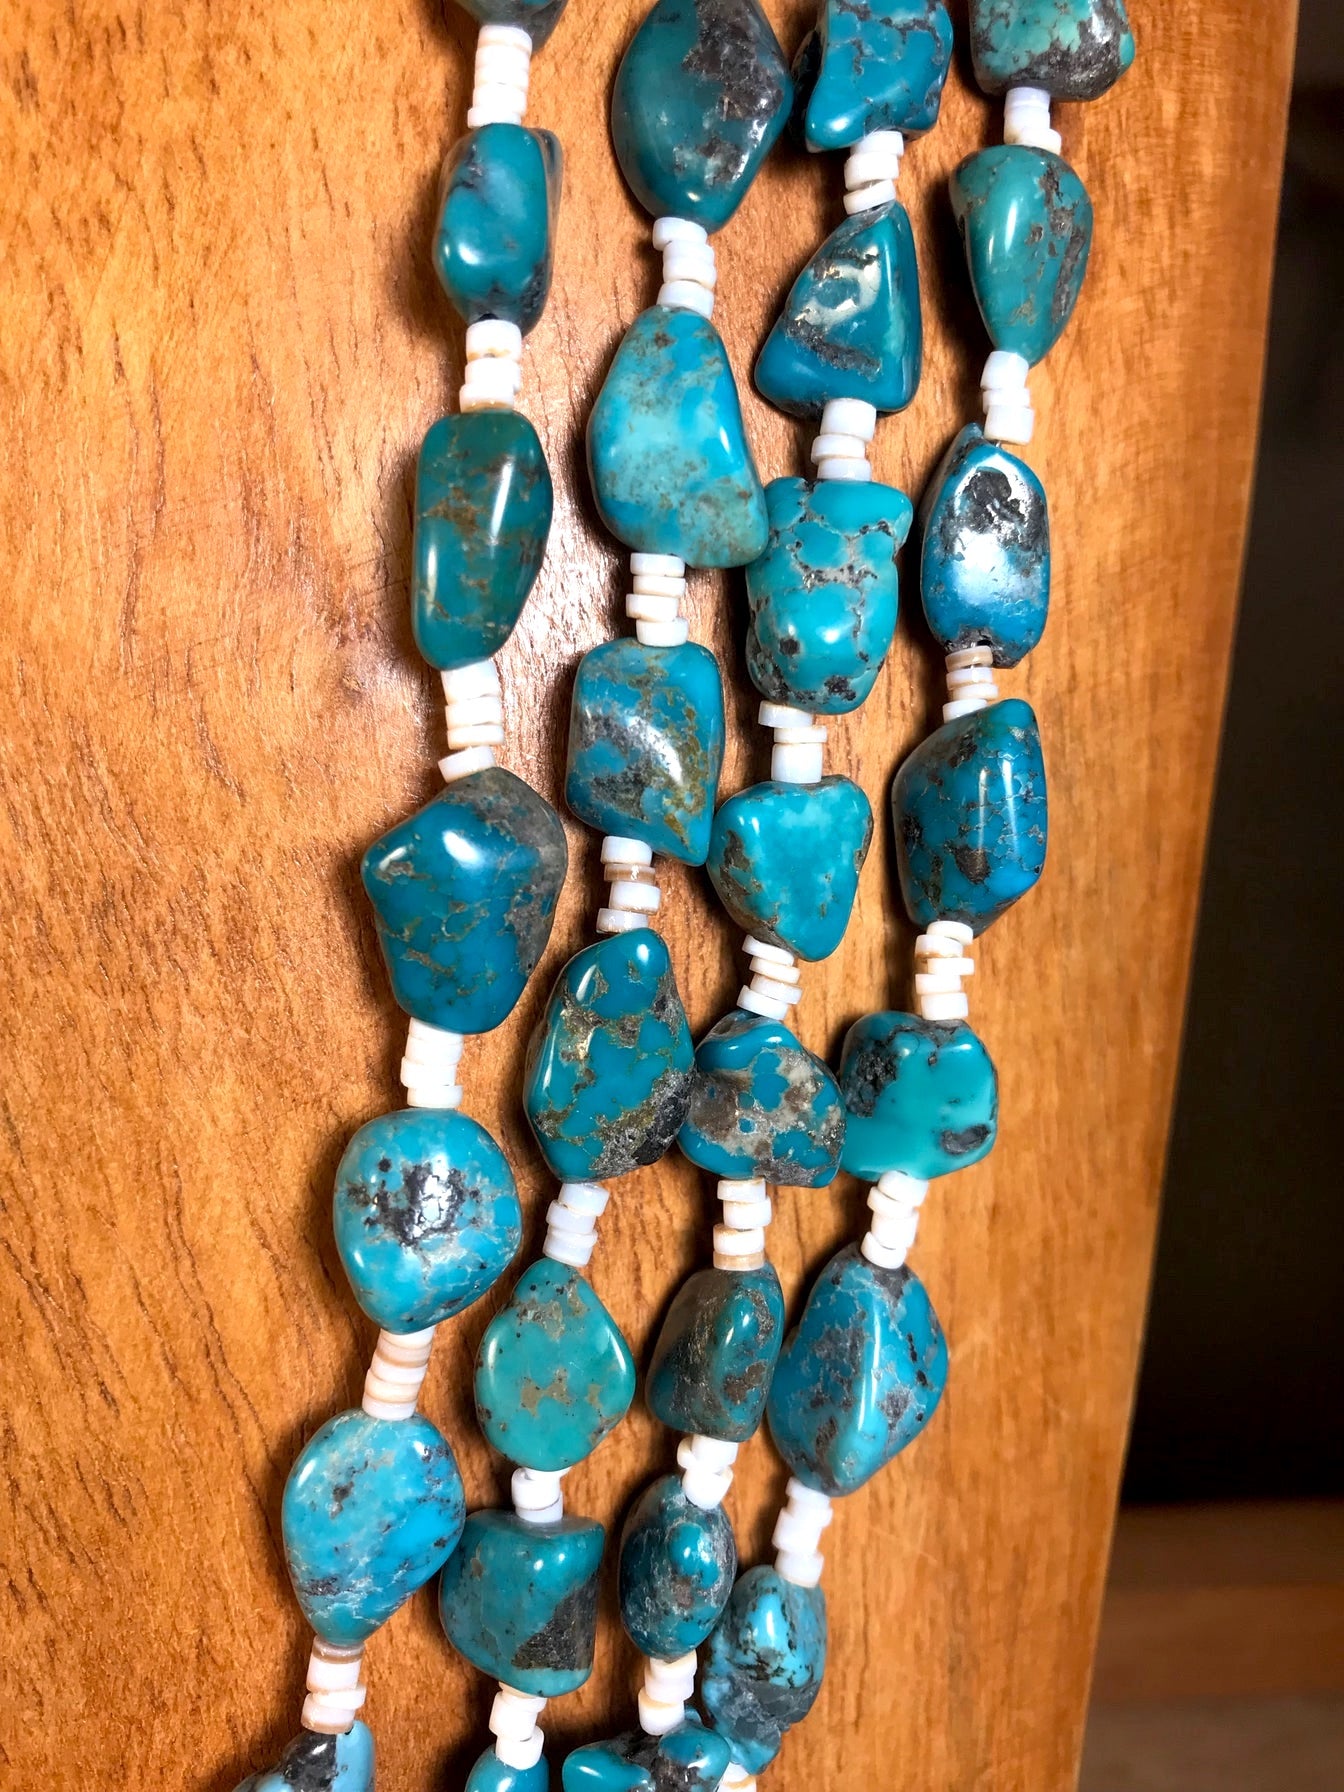 The Sherry 4 strand Turquoise Necklace - Ny Texas Style Boutique Four strand Native made 30" inch length turquoise and heishi sterling silver necklace. The perfect piece to layer alone or with other necklaces. Size: 30" Inches Length Stone: Turquoise | Turquoise Native Made Sterling Silver Necklace, Western Necklace Jewelry, Boho 30" Inches Length Necklace, Cowgirl NFR Rodeo Jewelry